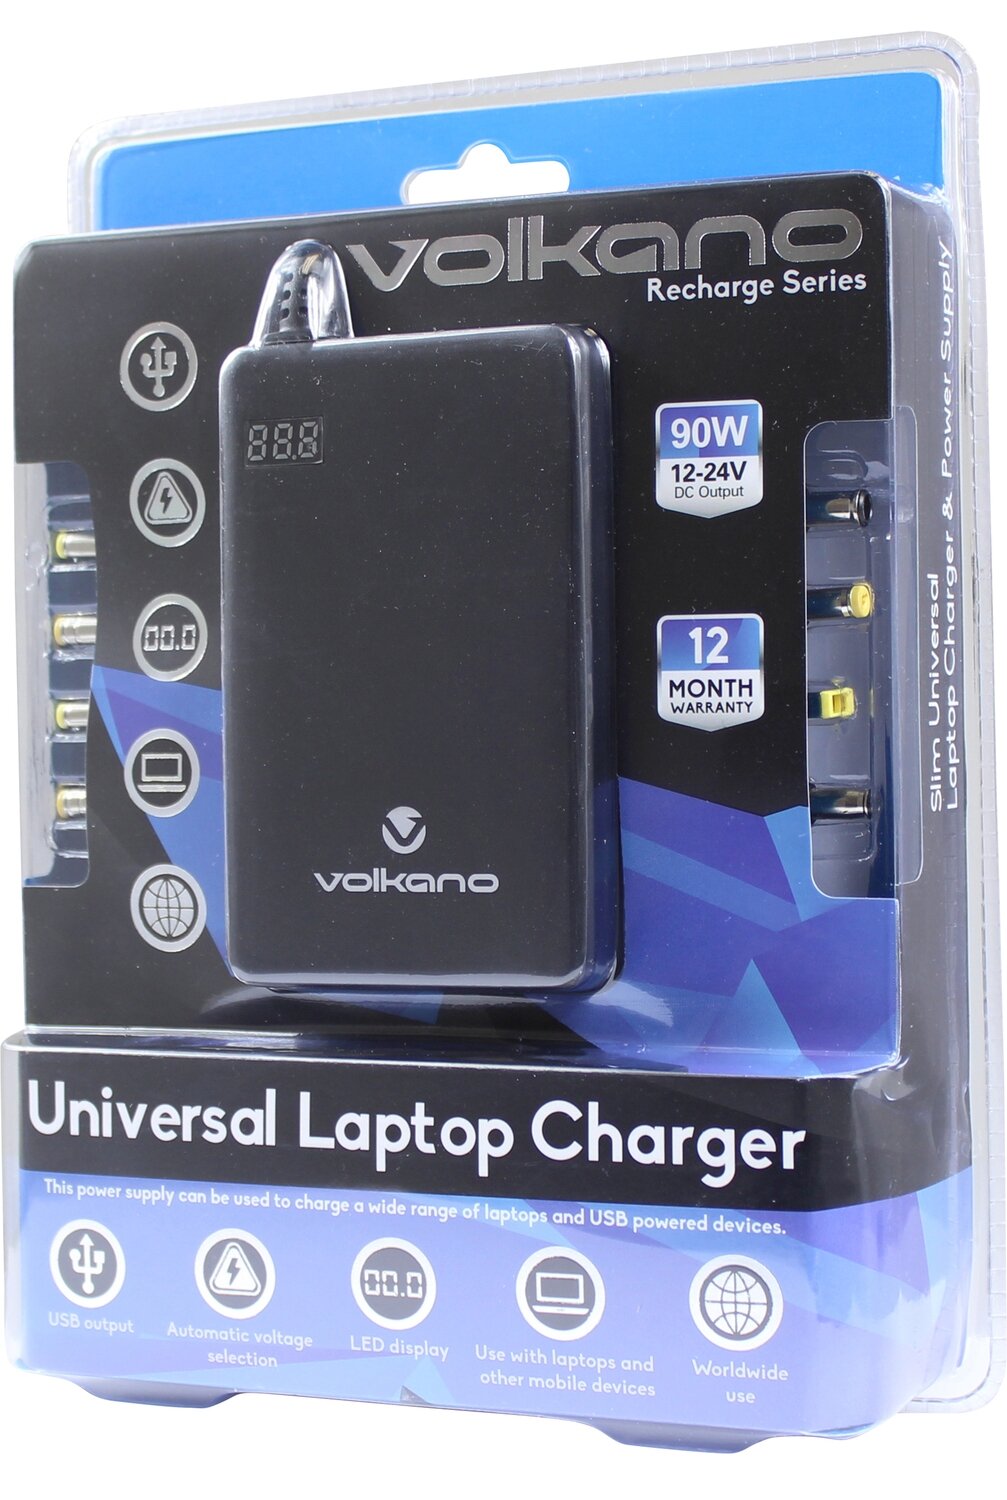 Volkano Recharge Series - Universal Laptop Charger -multiple connectors; up to 90W